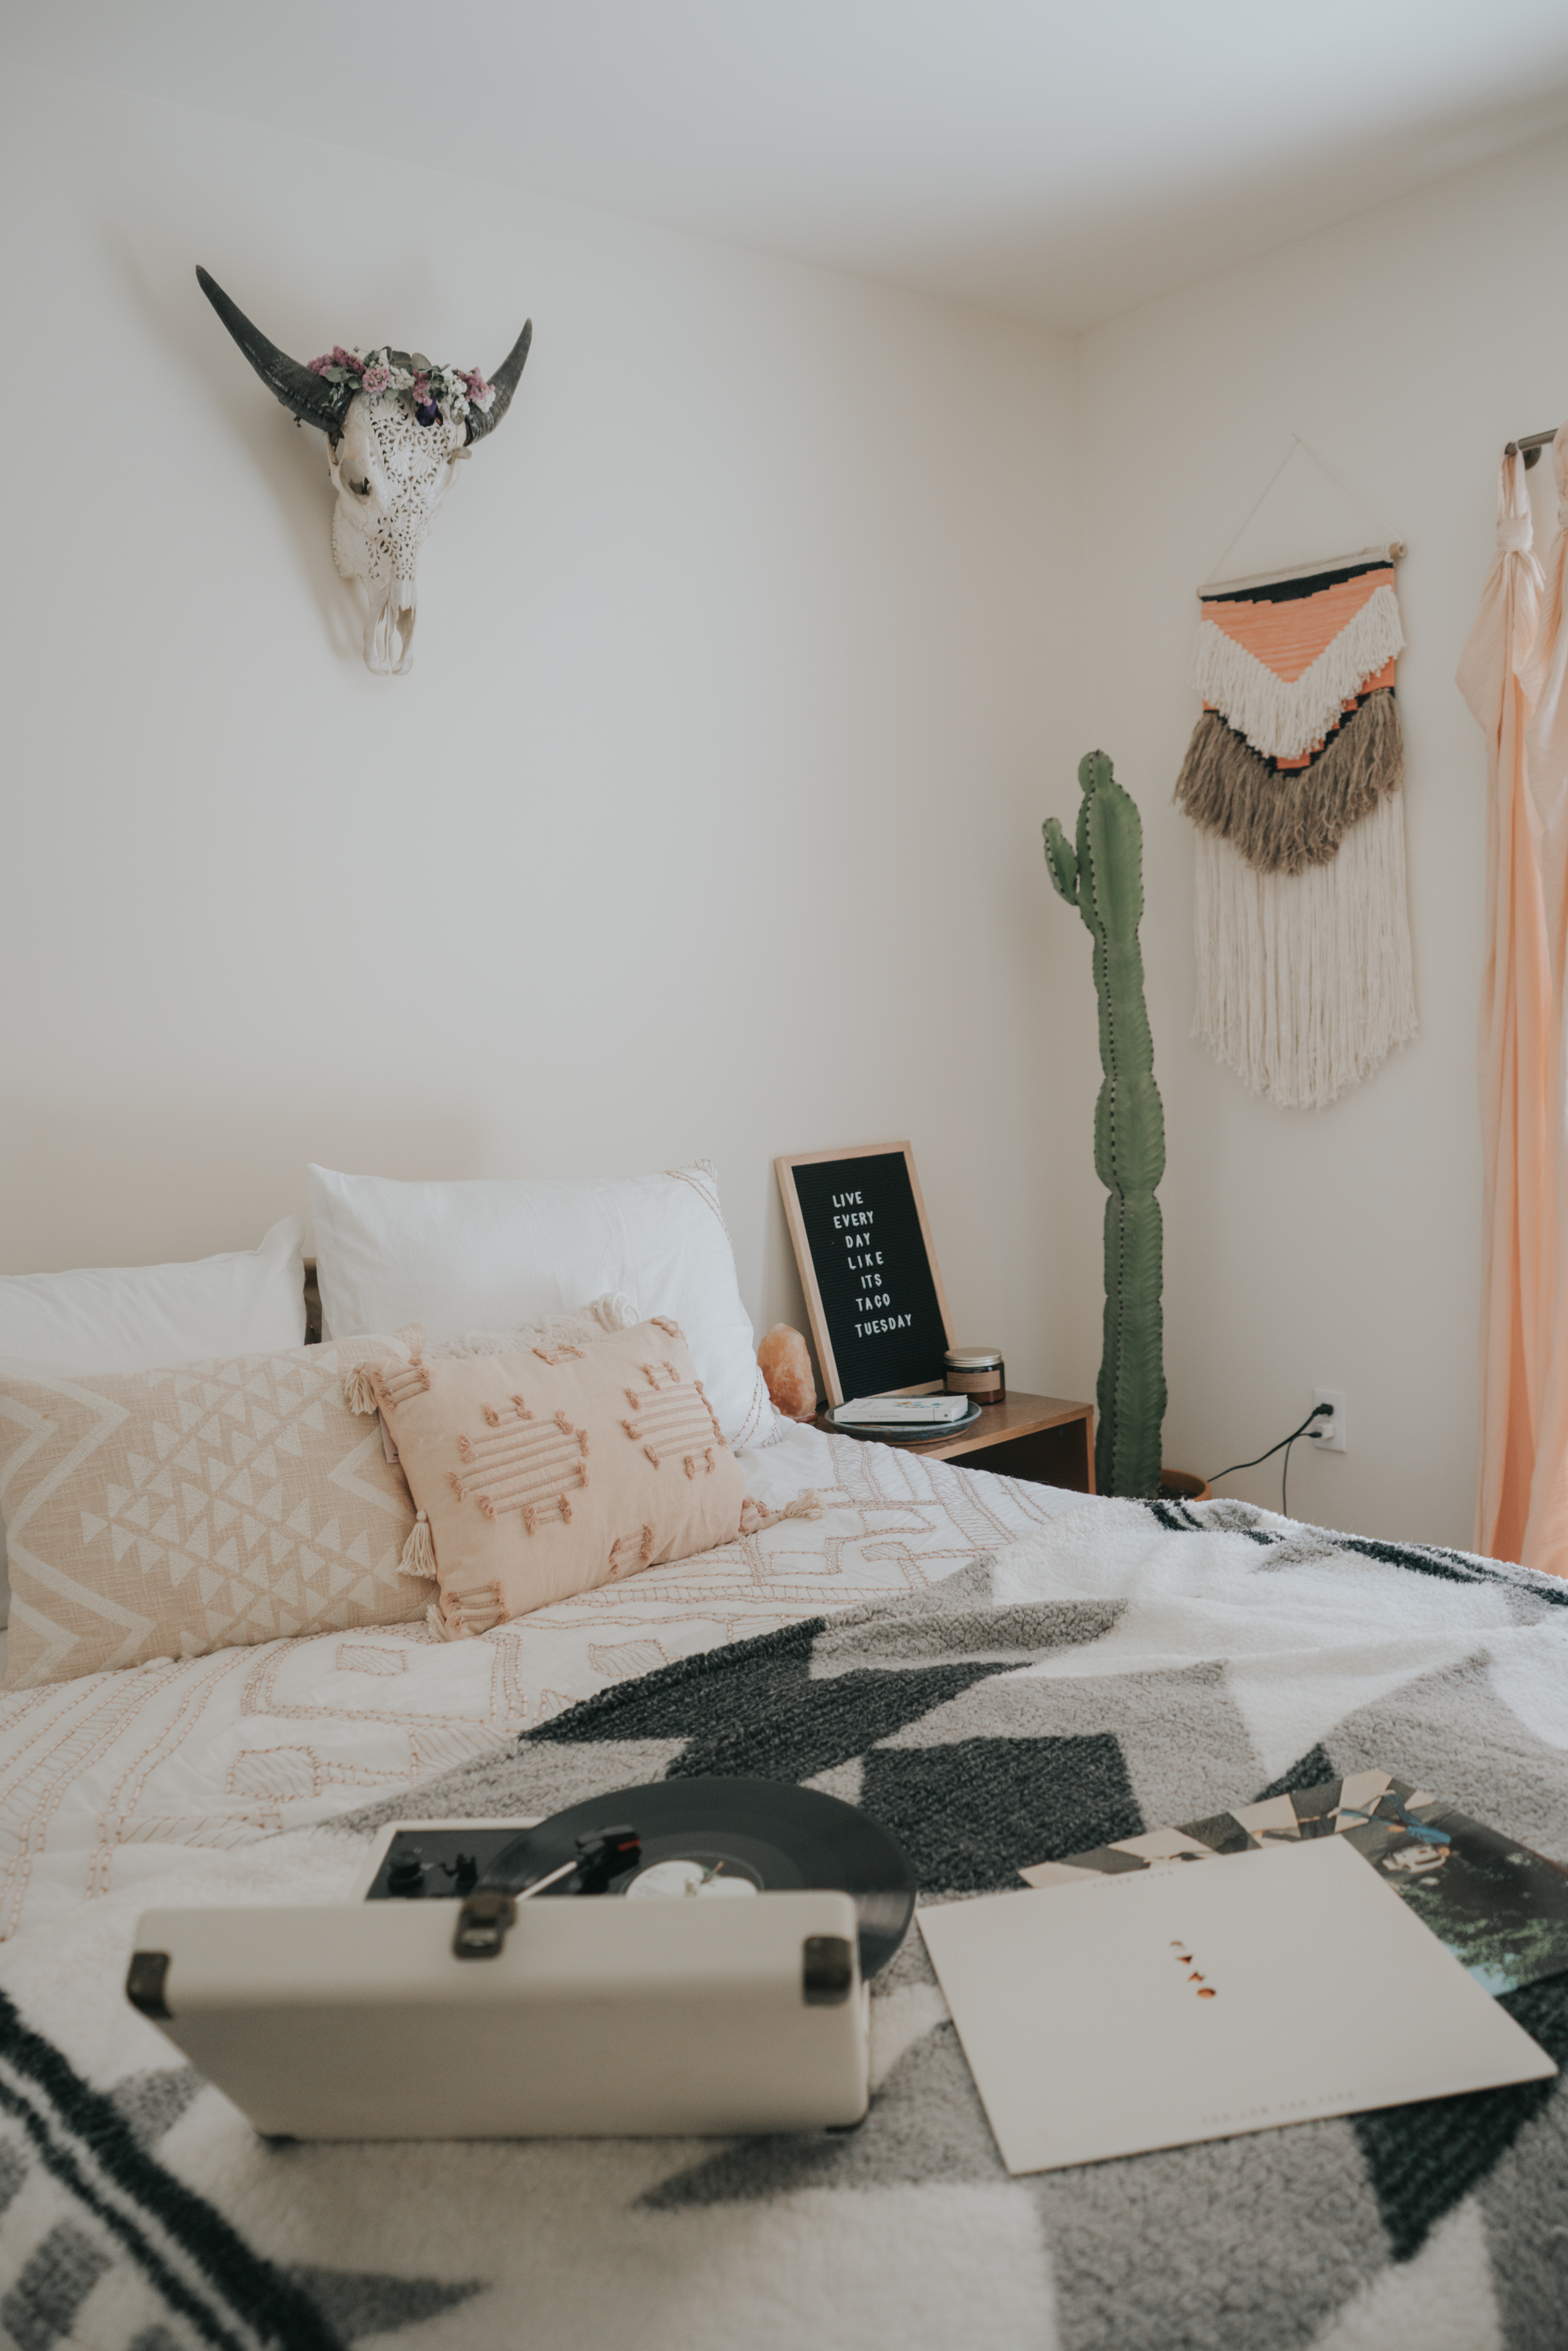 Bedroom Interior Design Reveal with Urban Outfitters Home //@allisonnkelleyy #UOHome